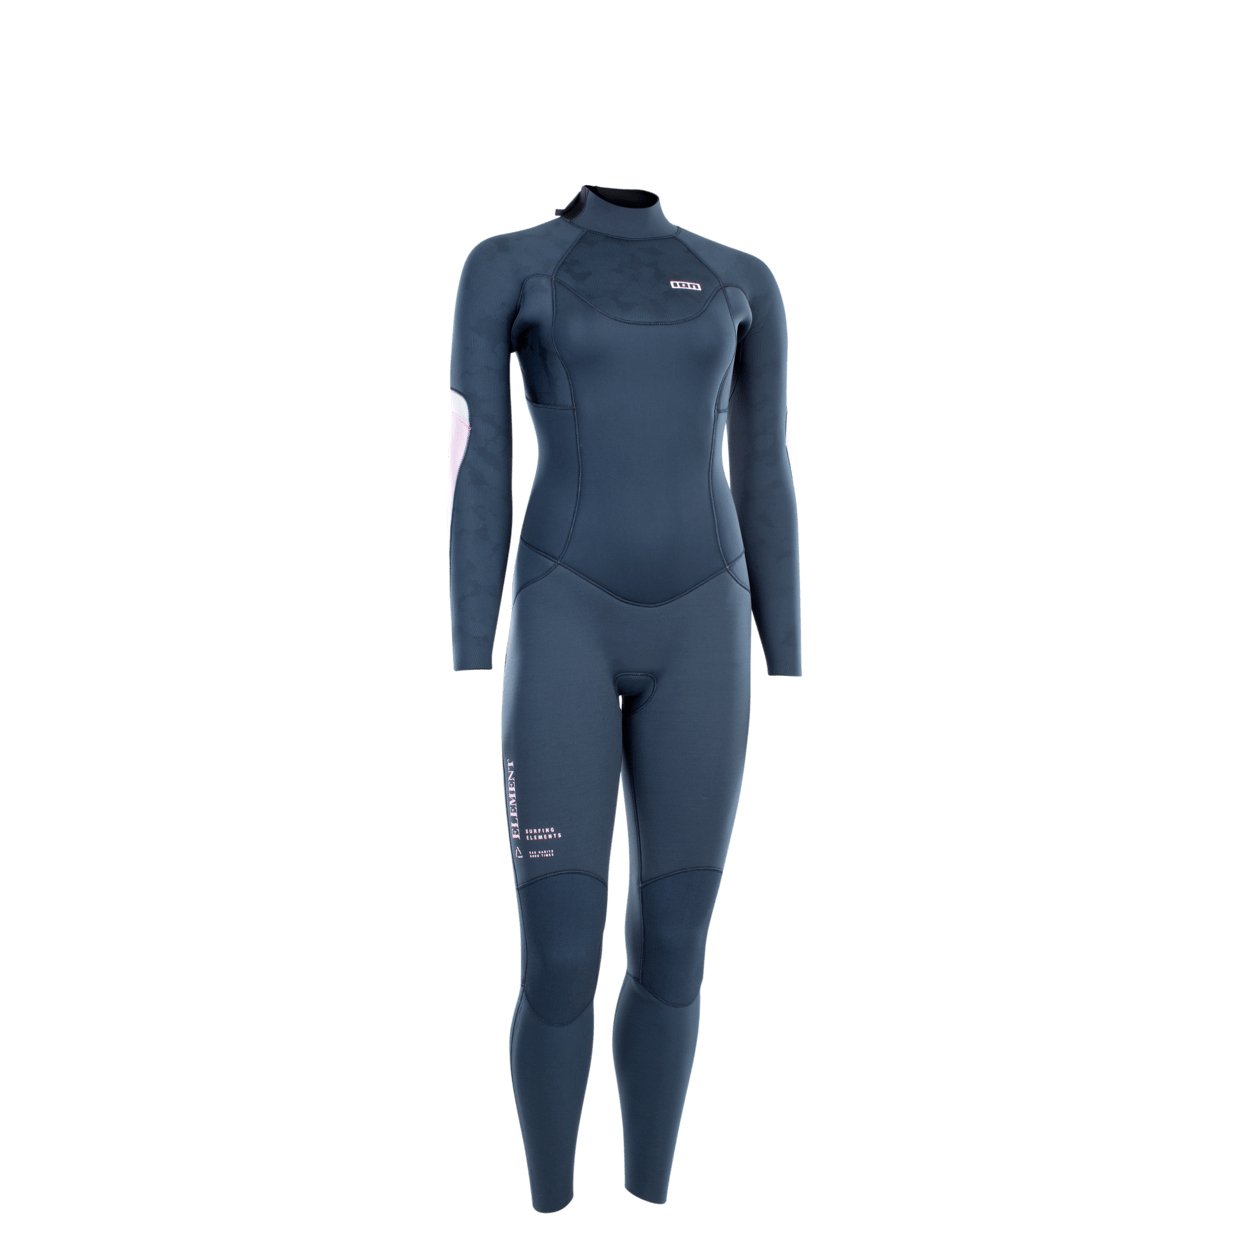 ION Element 5/4 Back Zip 2022 - Worthing Watersports - 9008415951864 - Wetsuits - ION Water